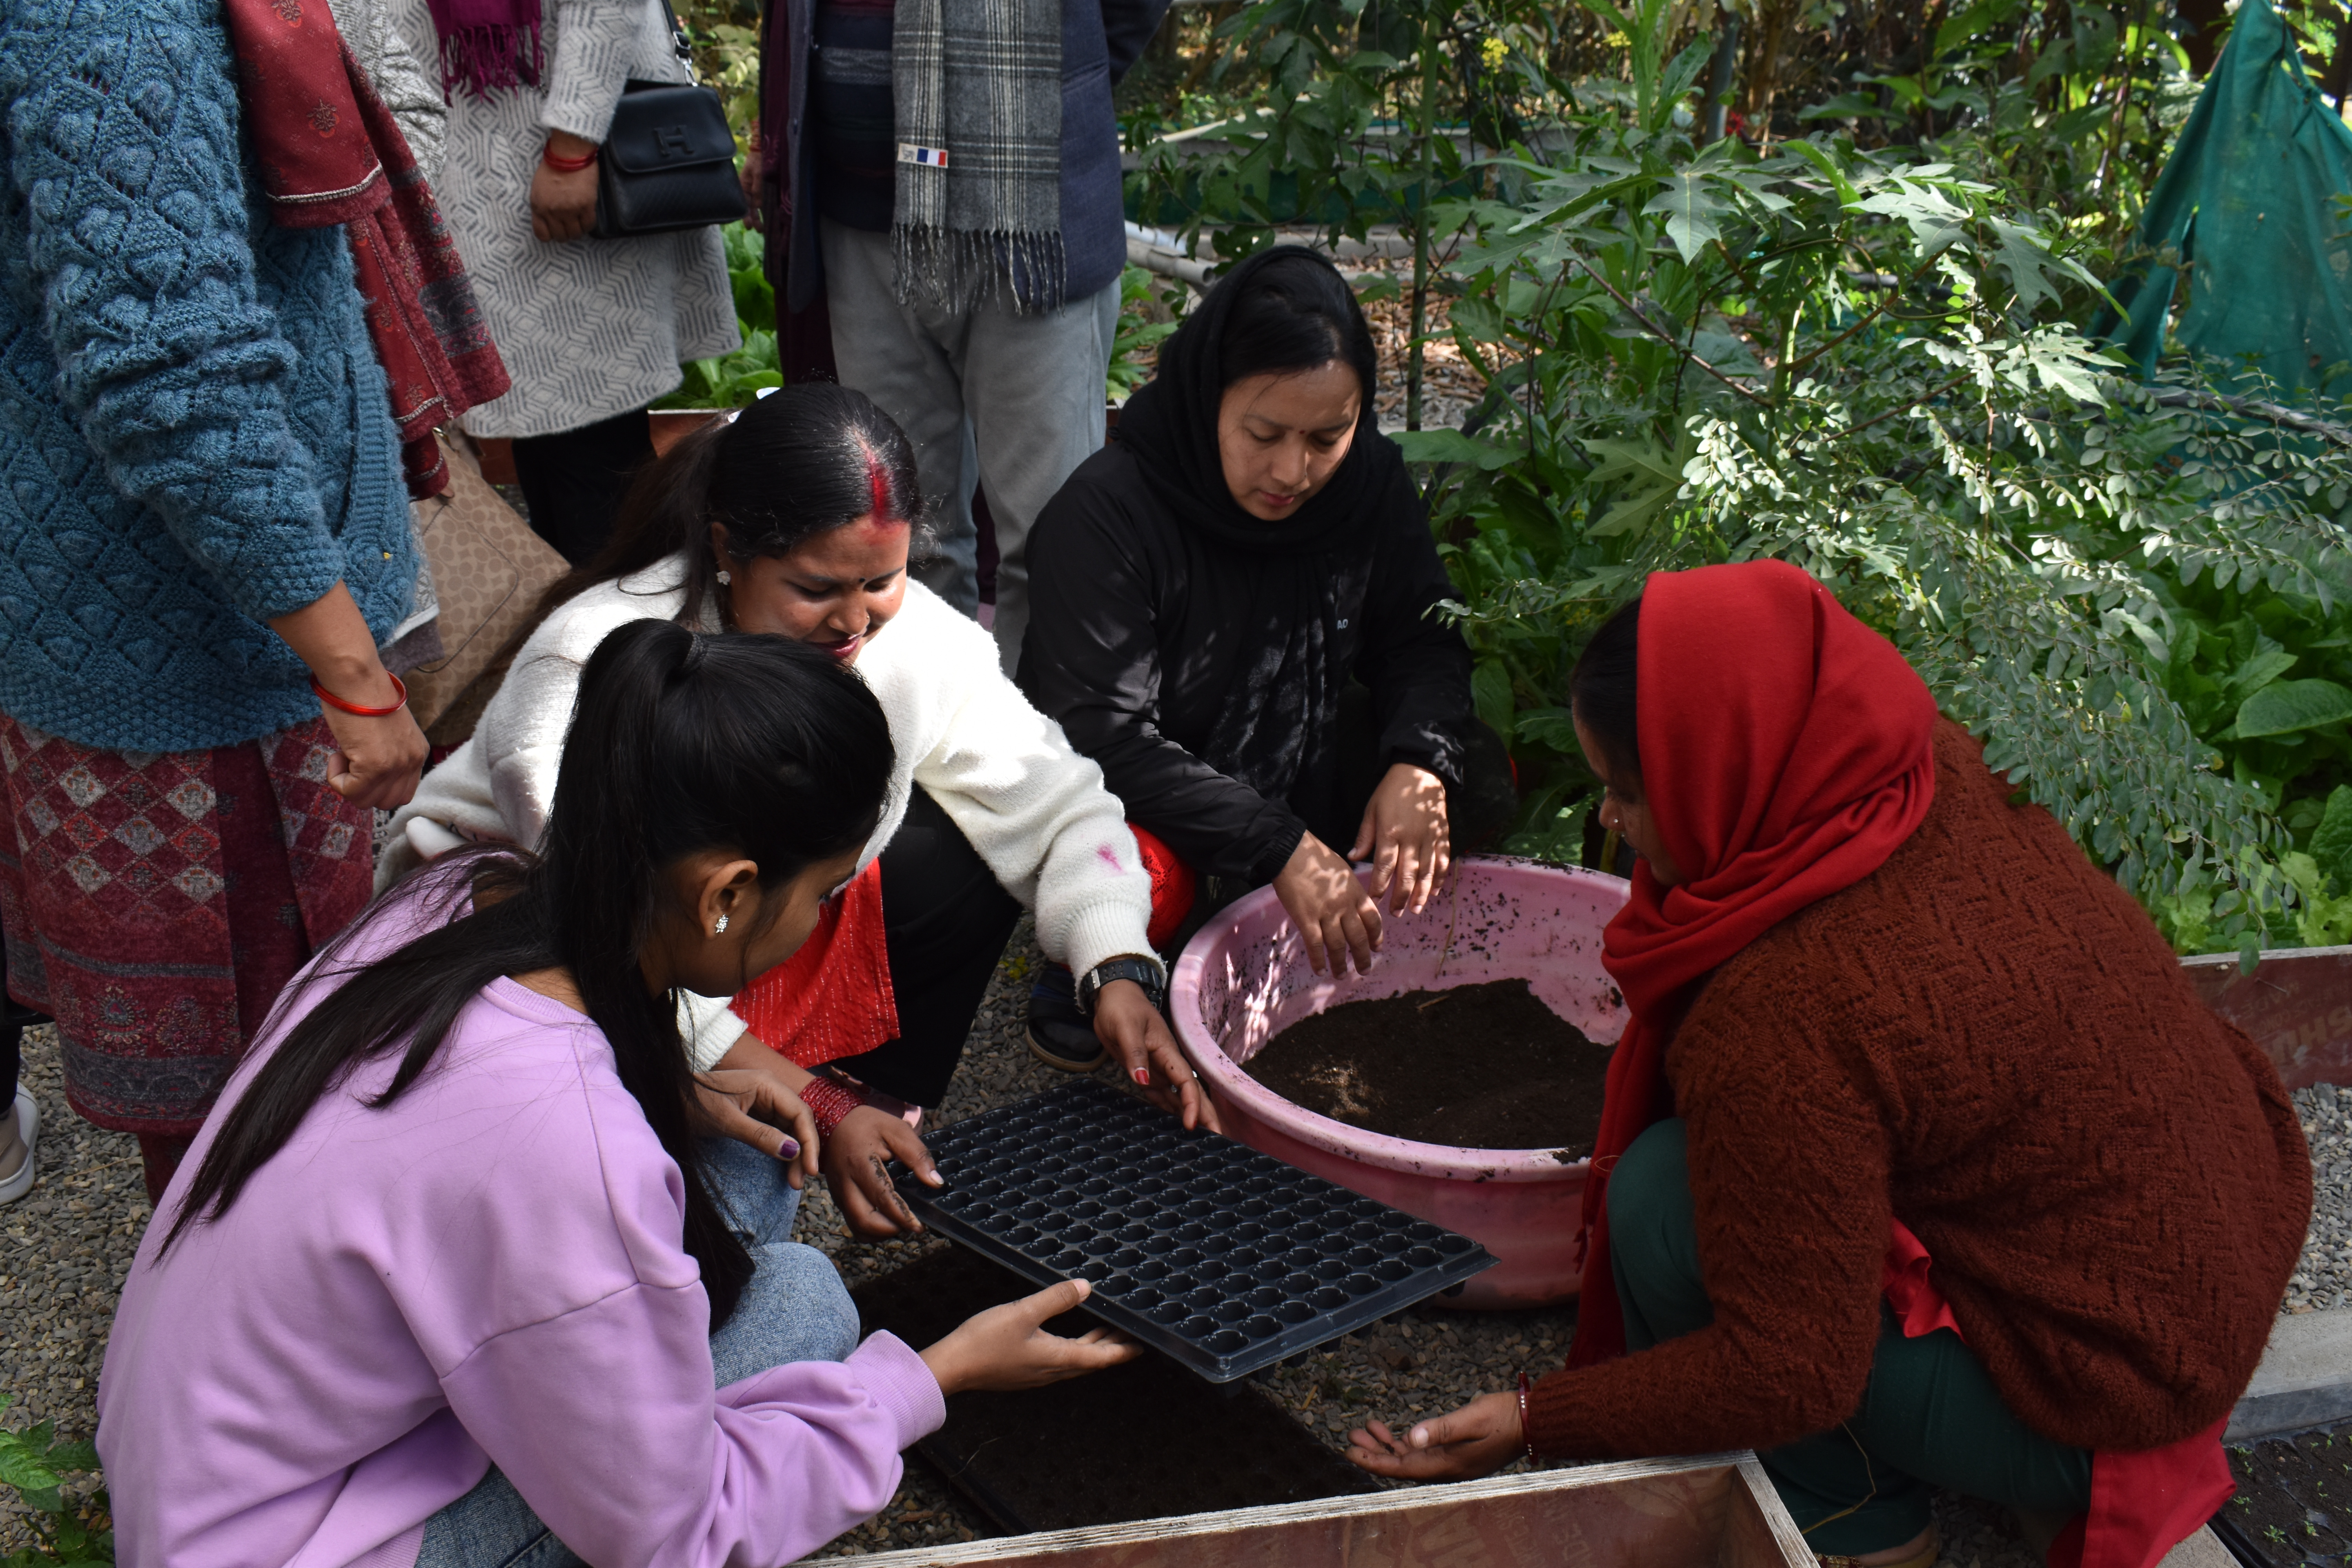 A group of people gather around a bucket of soil and fill seed trays.